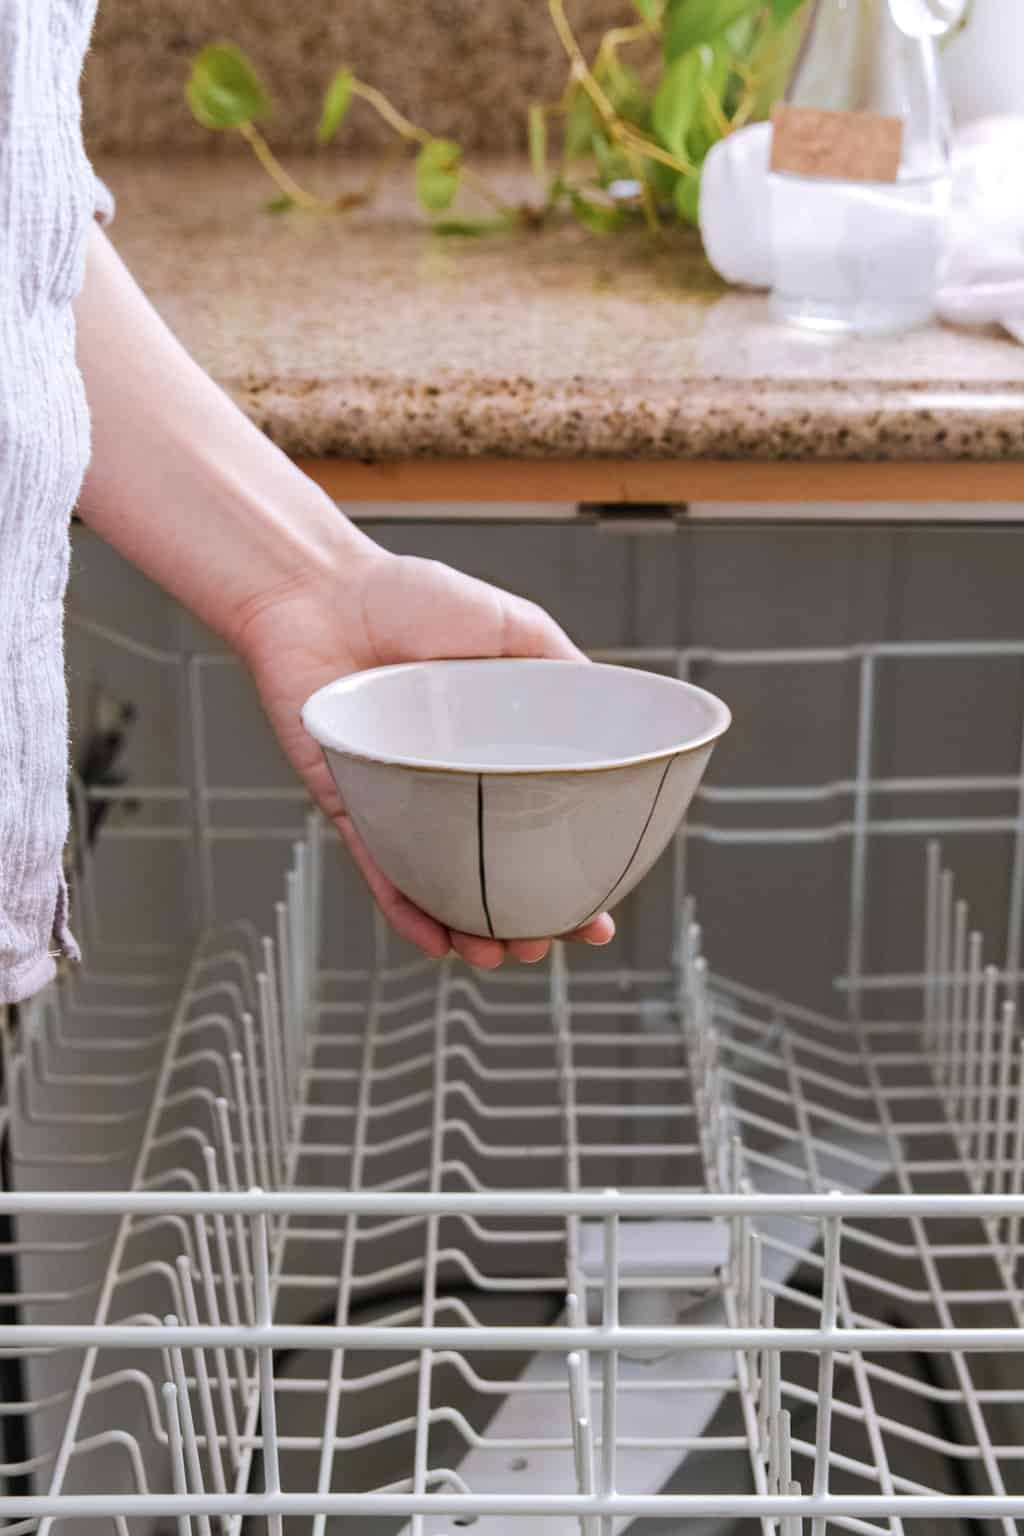 How to do a disinfecting wash to clean your dishwasher